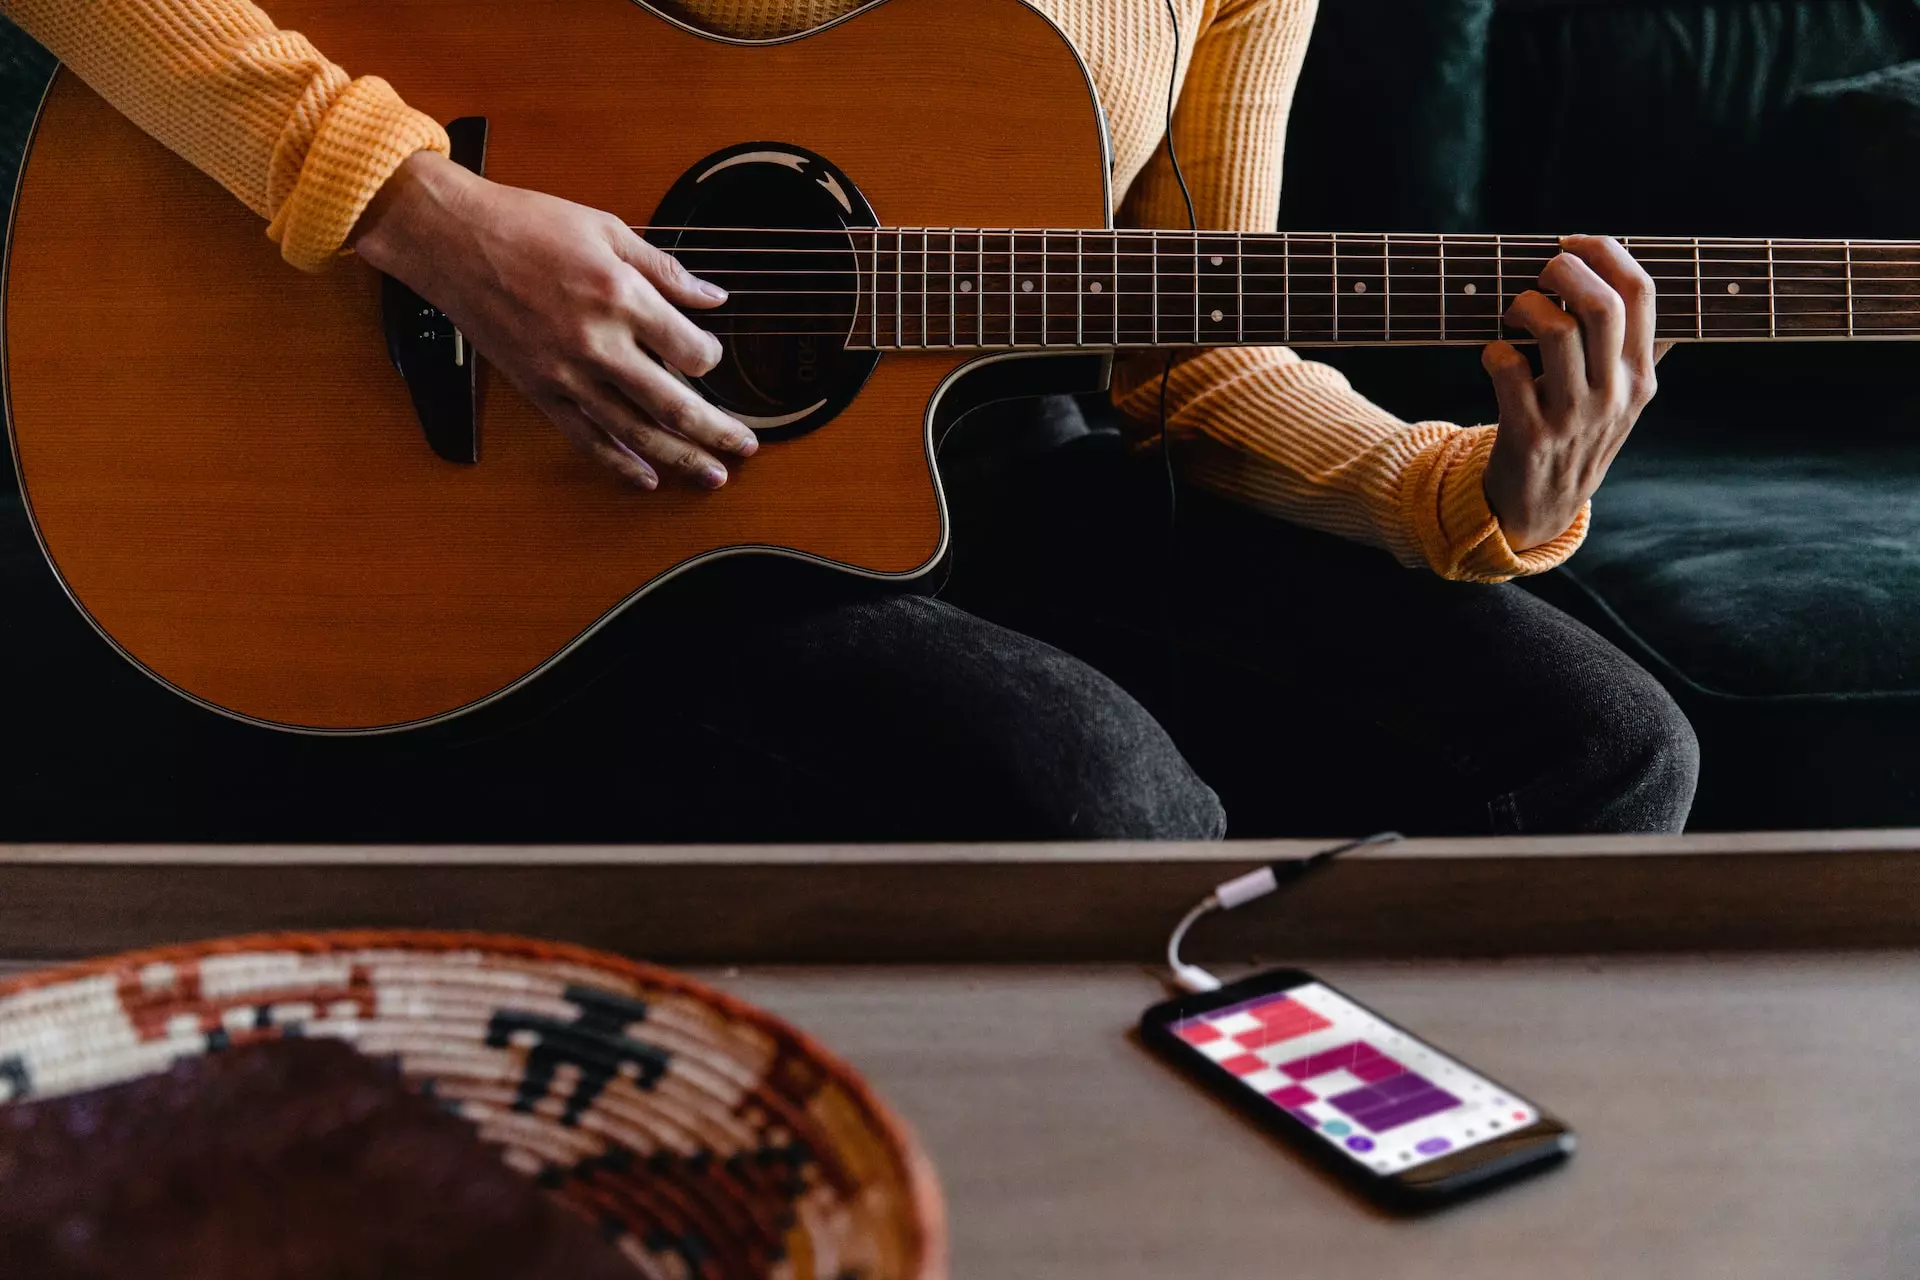 Phone connected to a guitar being played by a person.